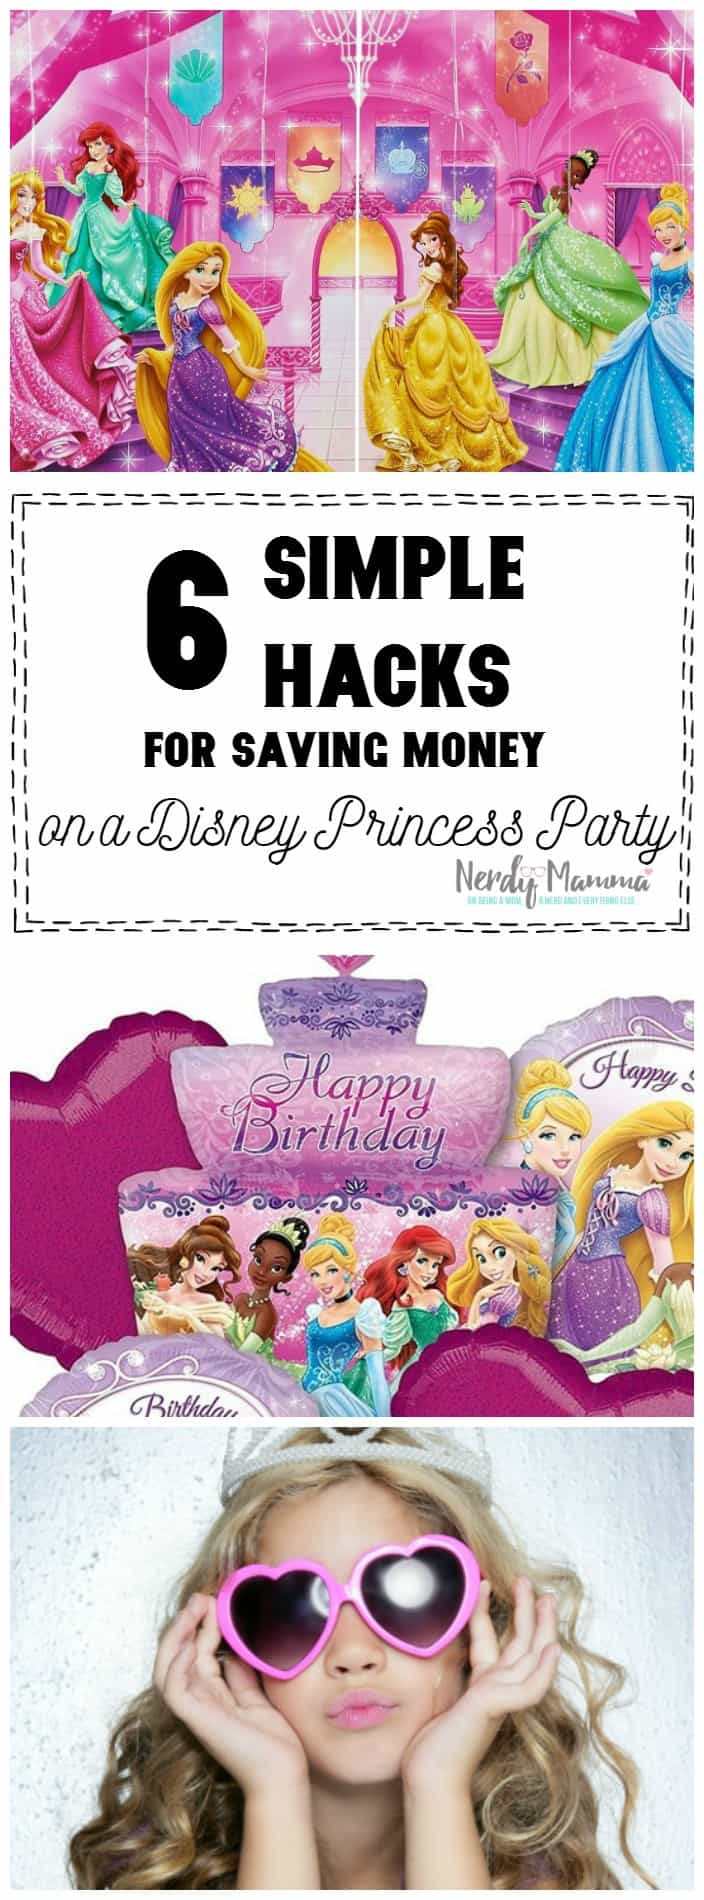 This list will literally save me 100s of dollars because my daughter INSISTS on a Disney Princess birthday party.